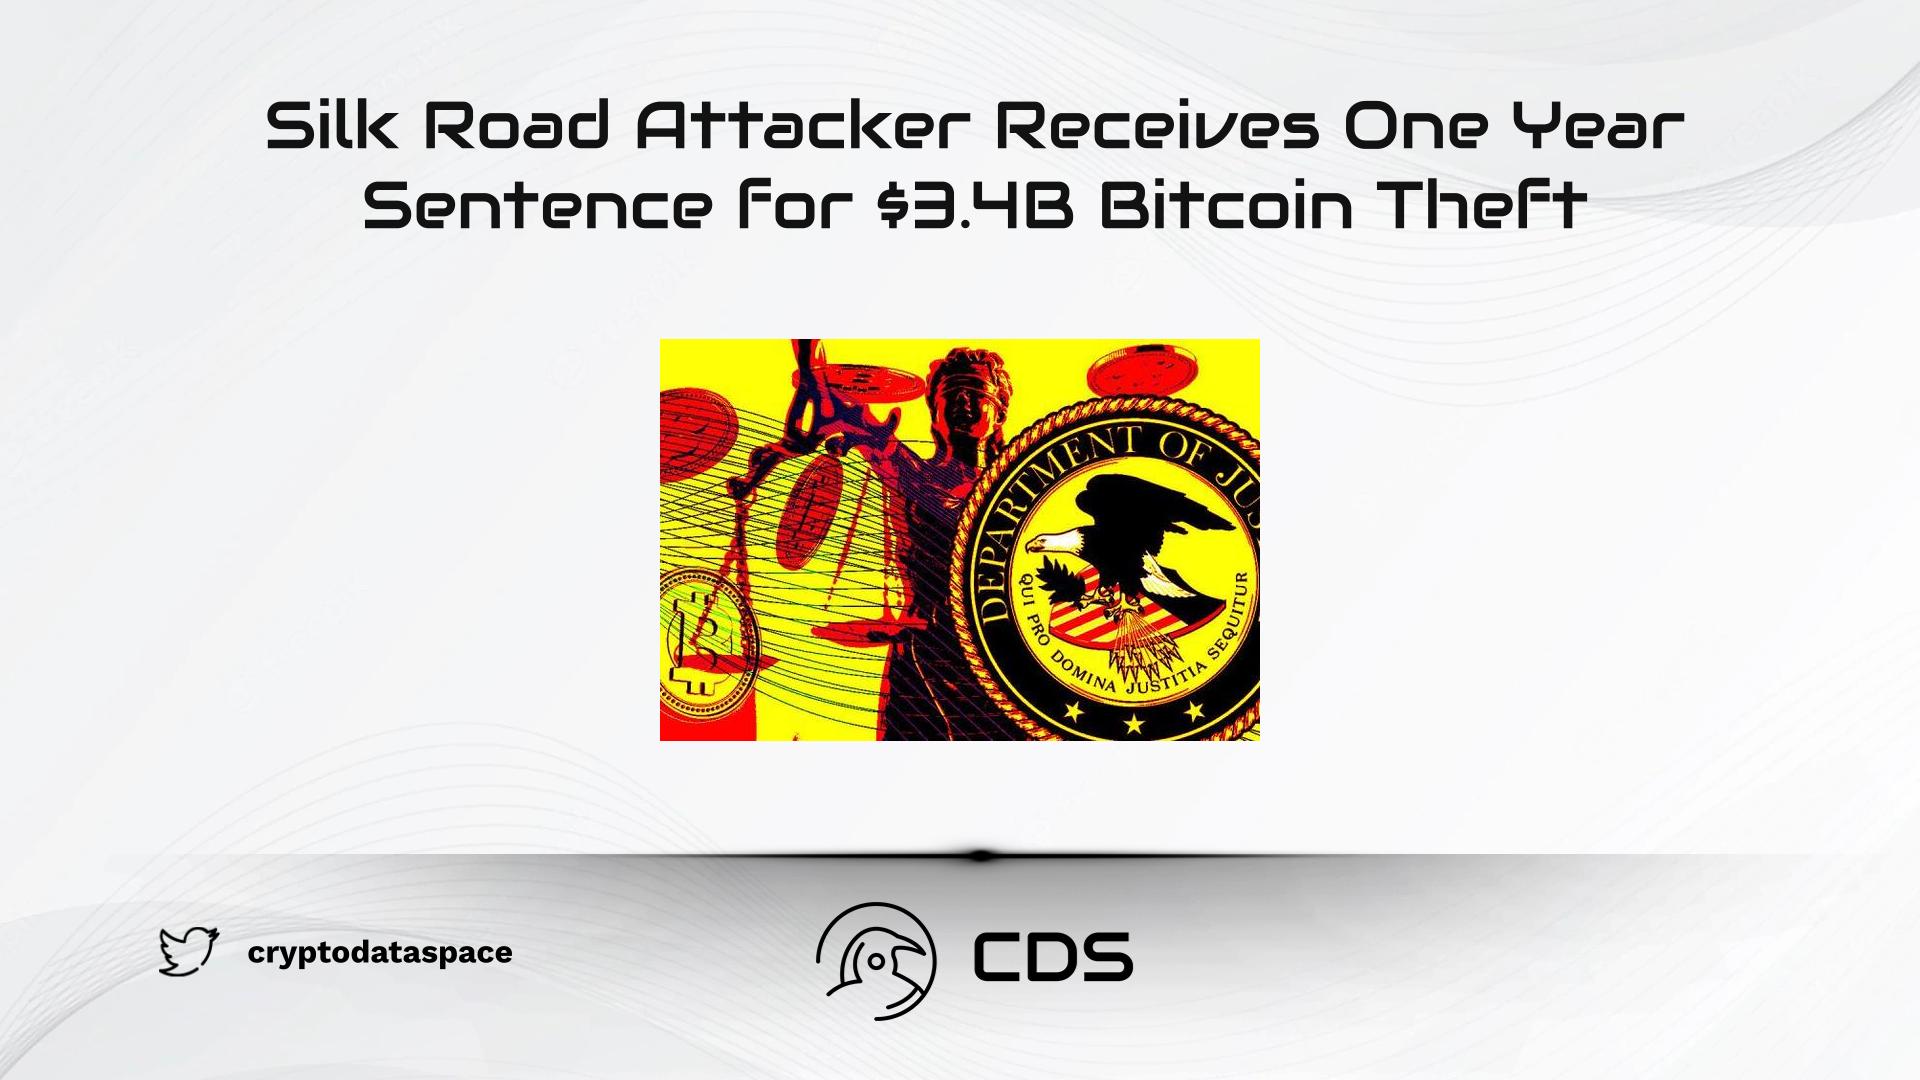 Silk Road Attacker Receives One Year Sentence for $3.4B Bitcoin Theft